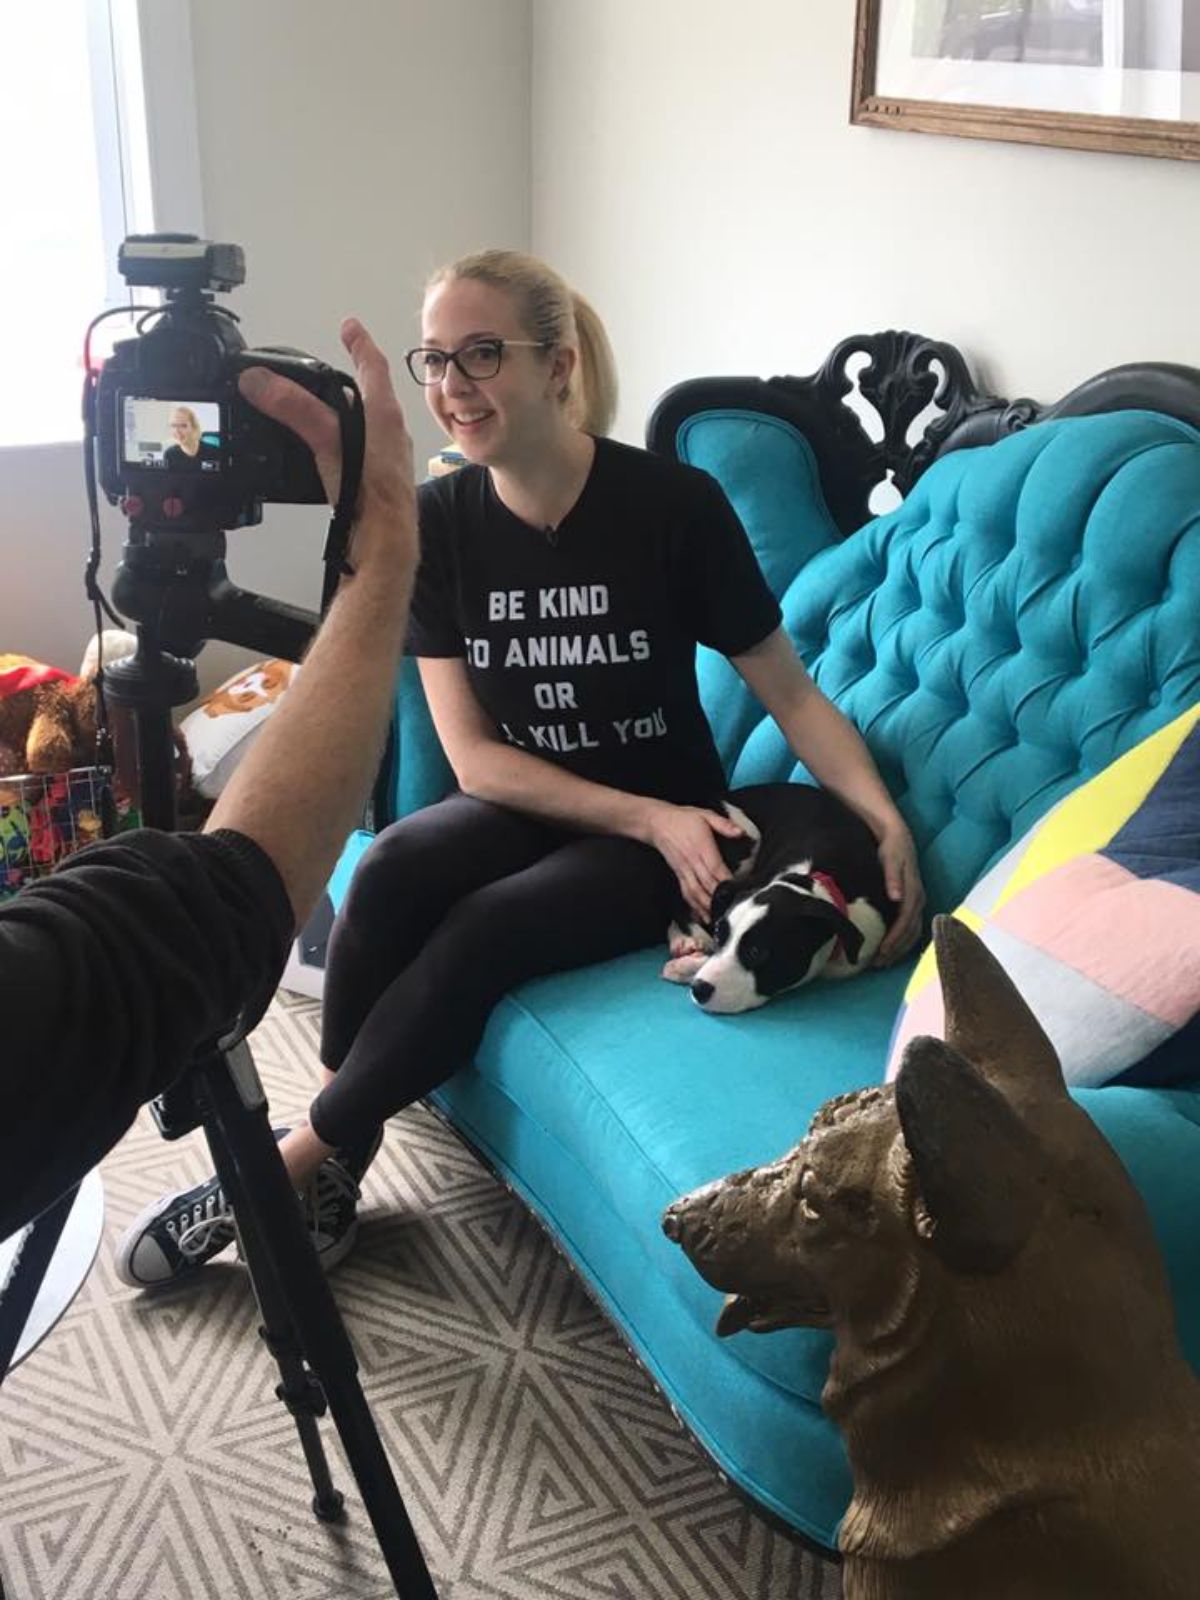 woman sitting on blue and black sofa with a black and white dog with someone videoing them